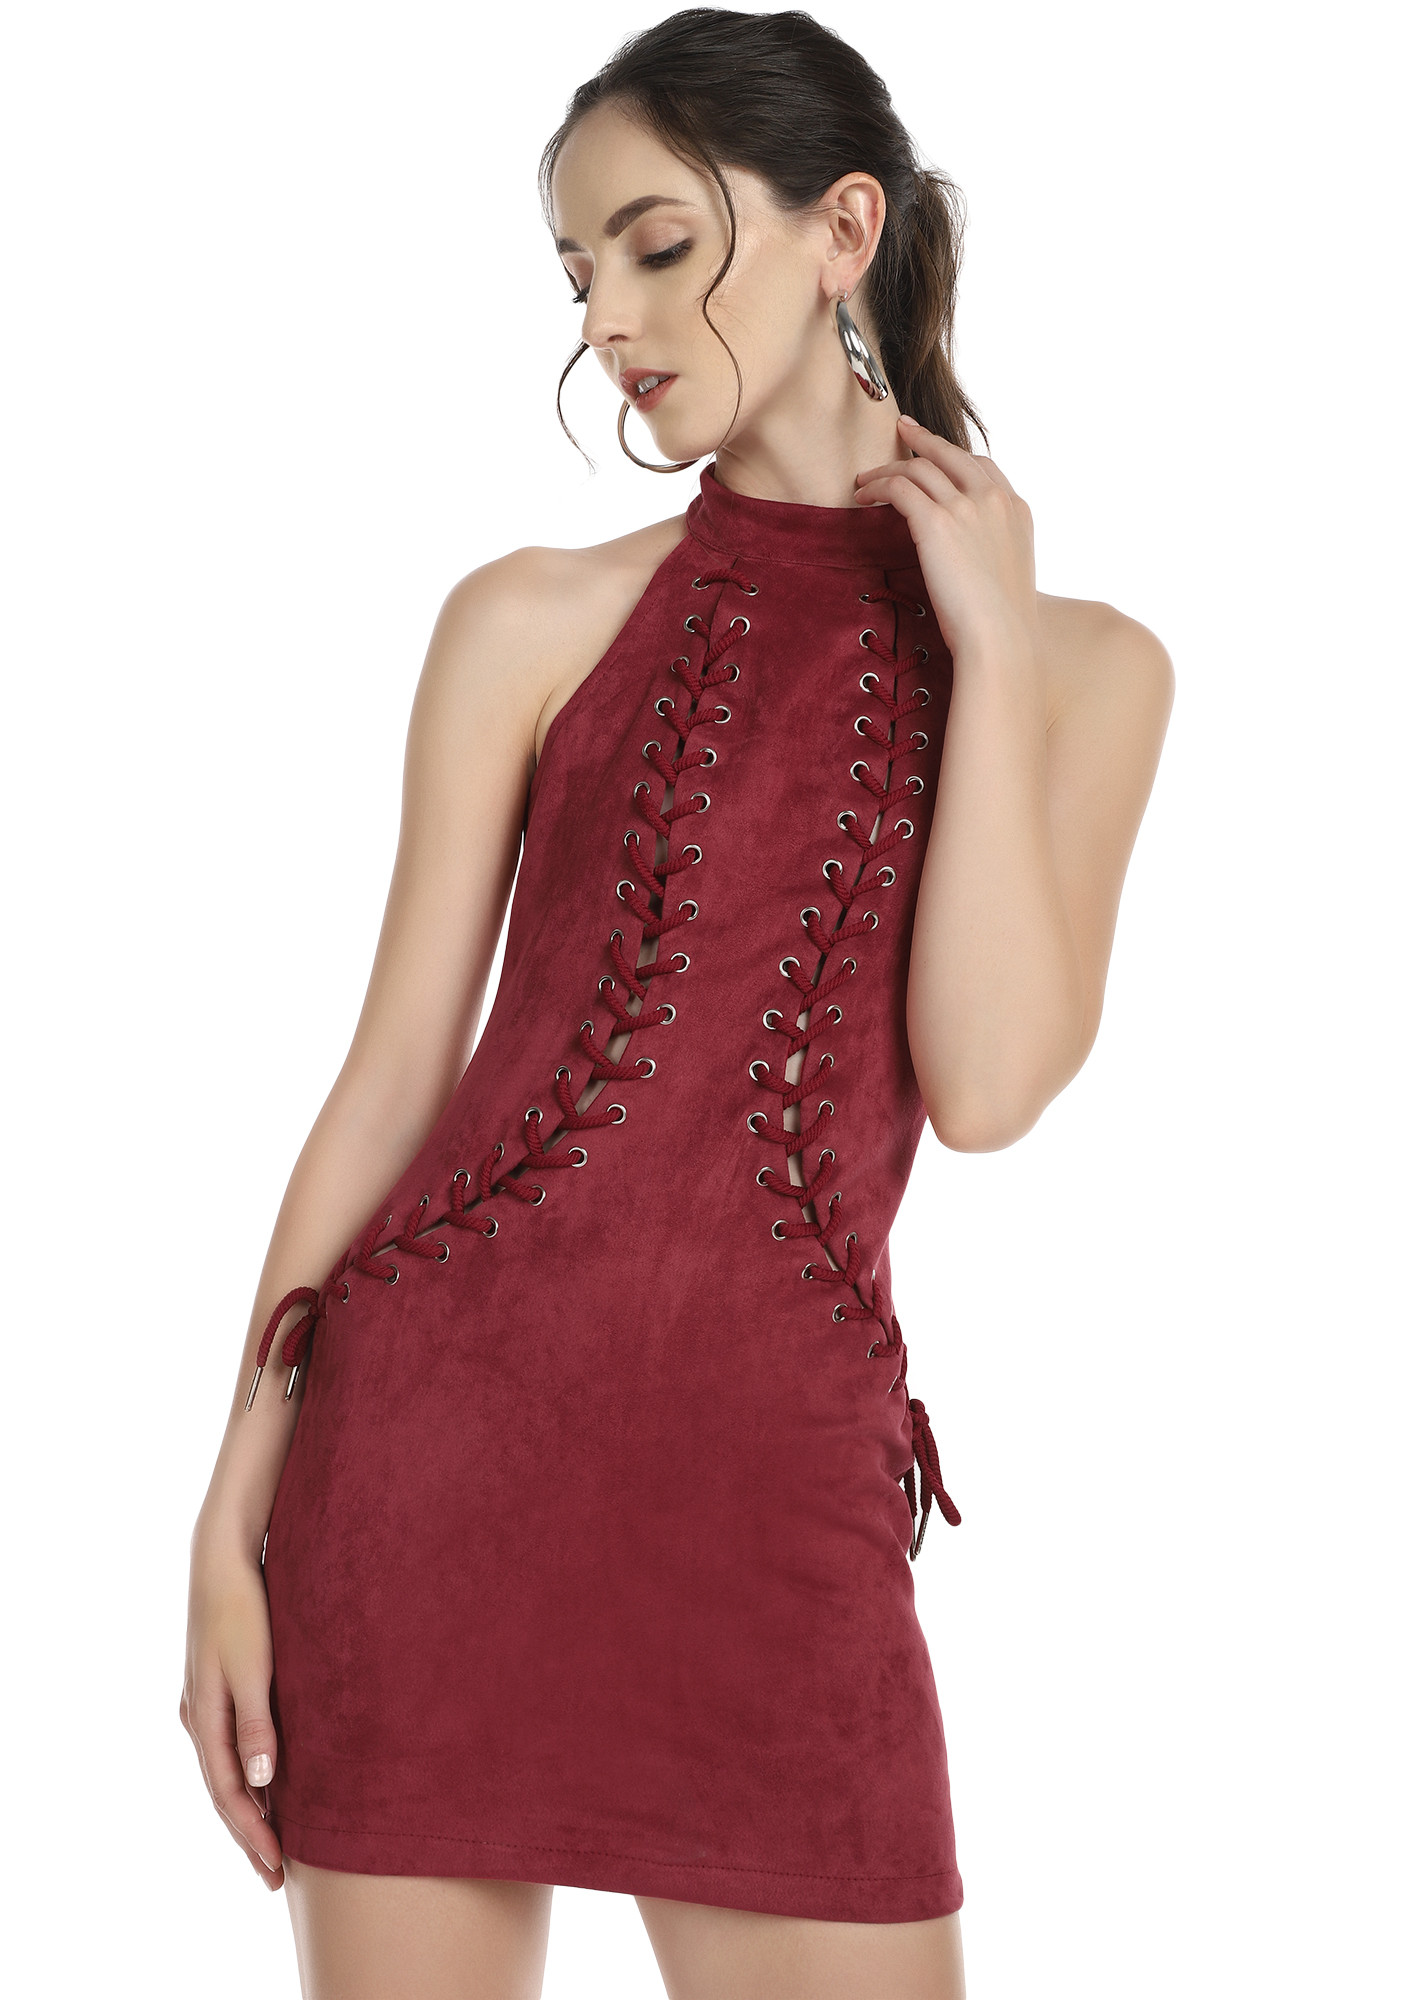 TIE UP AND TEASE BURGUNDY BODYCON DRESS